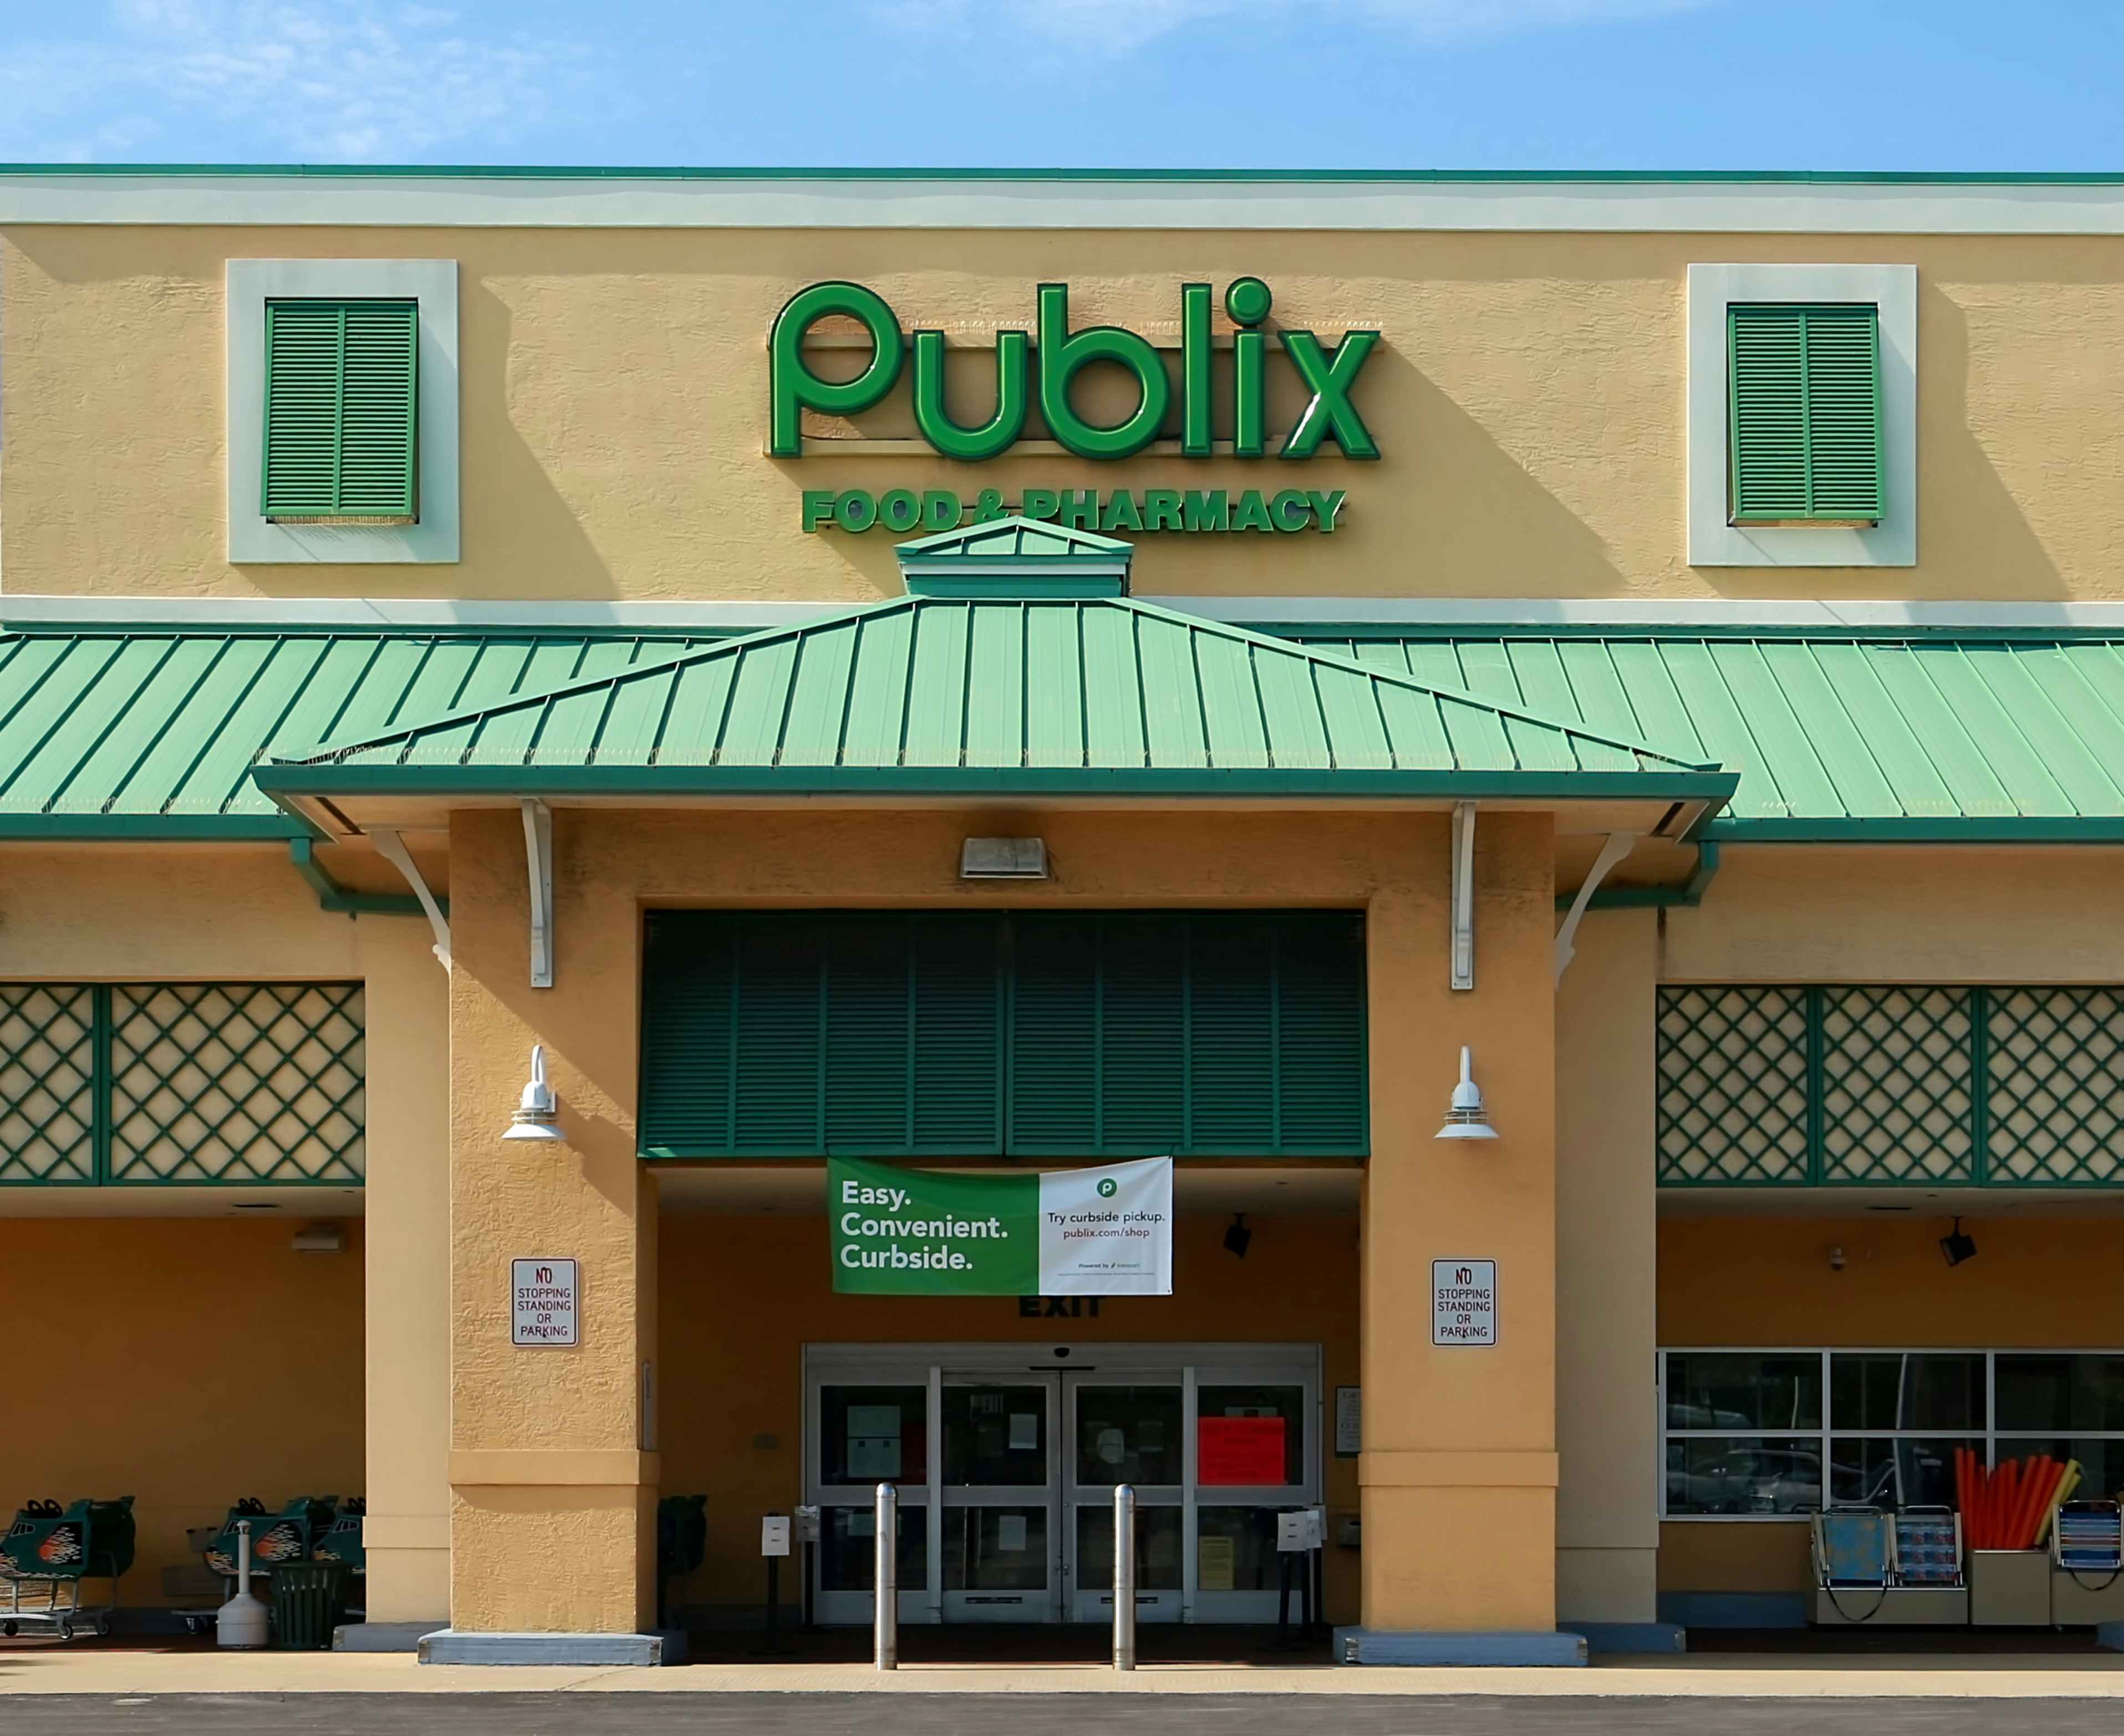 The front of a Publix grocery store.